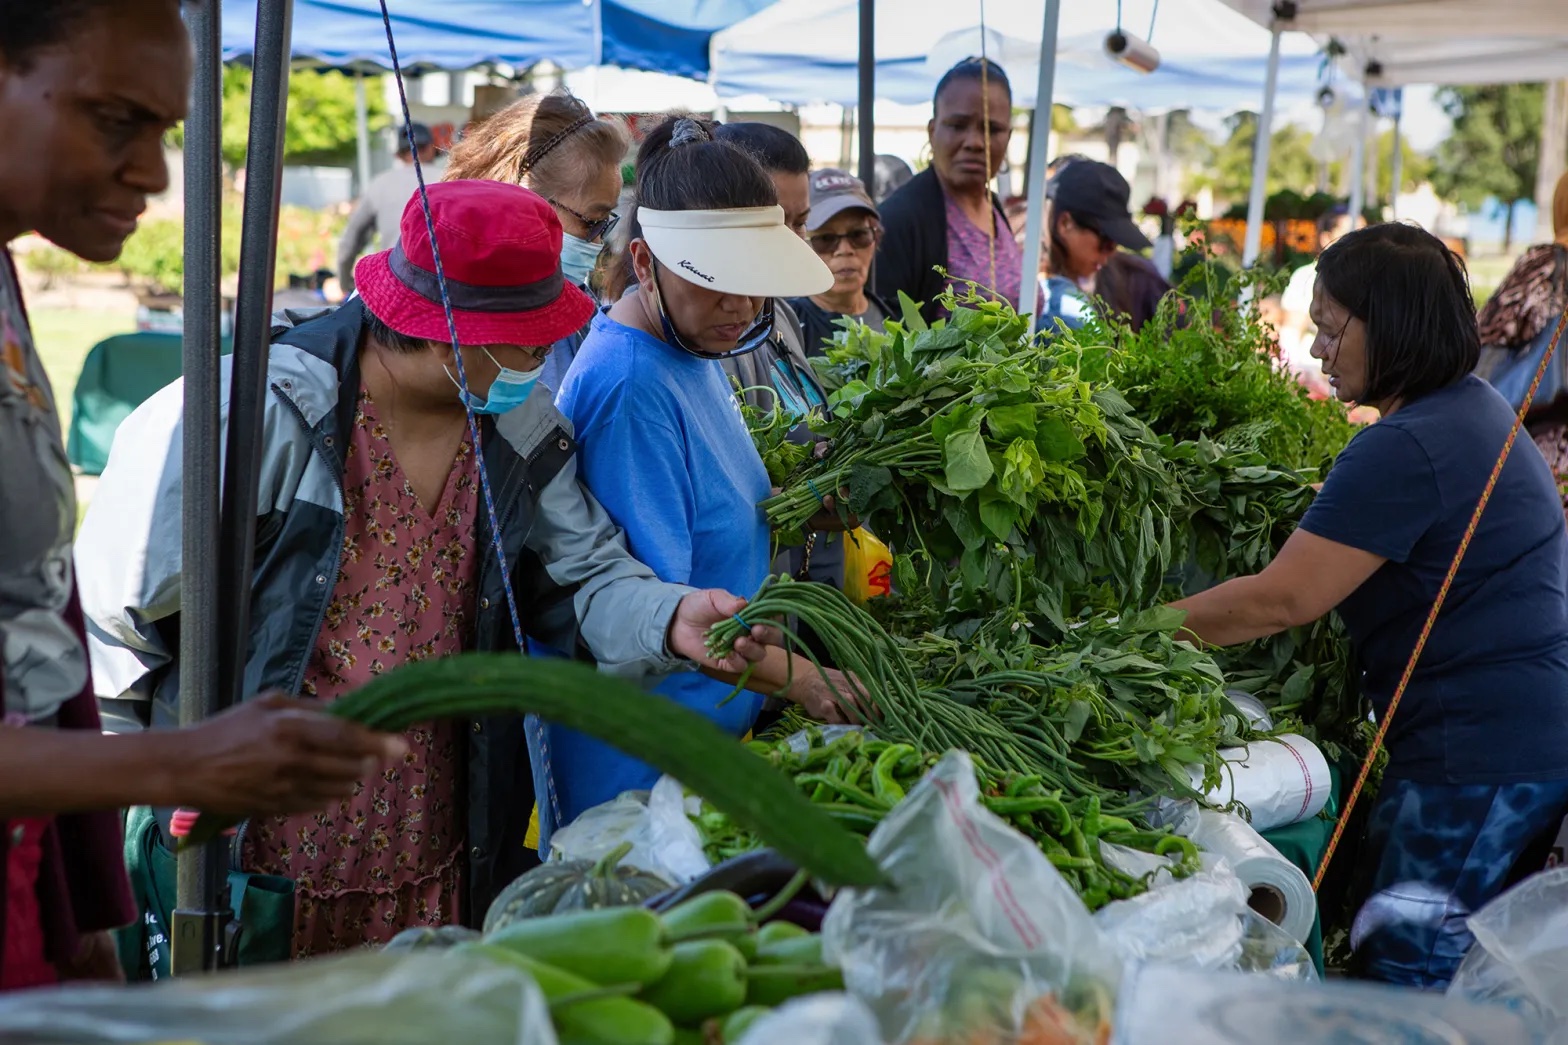 a woman works outside behind a table covered in green vegetables, with a line of people of different races looking through the produce